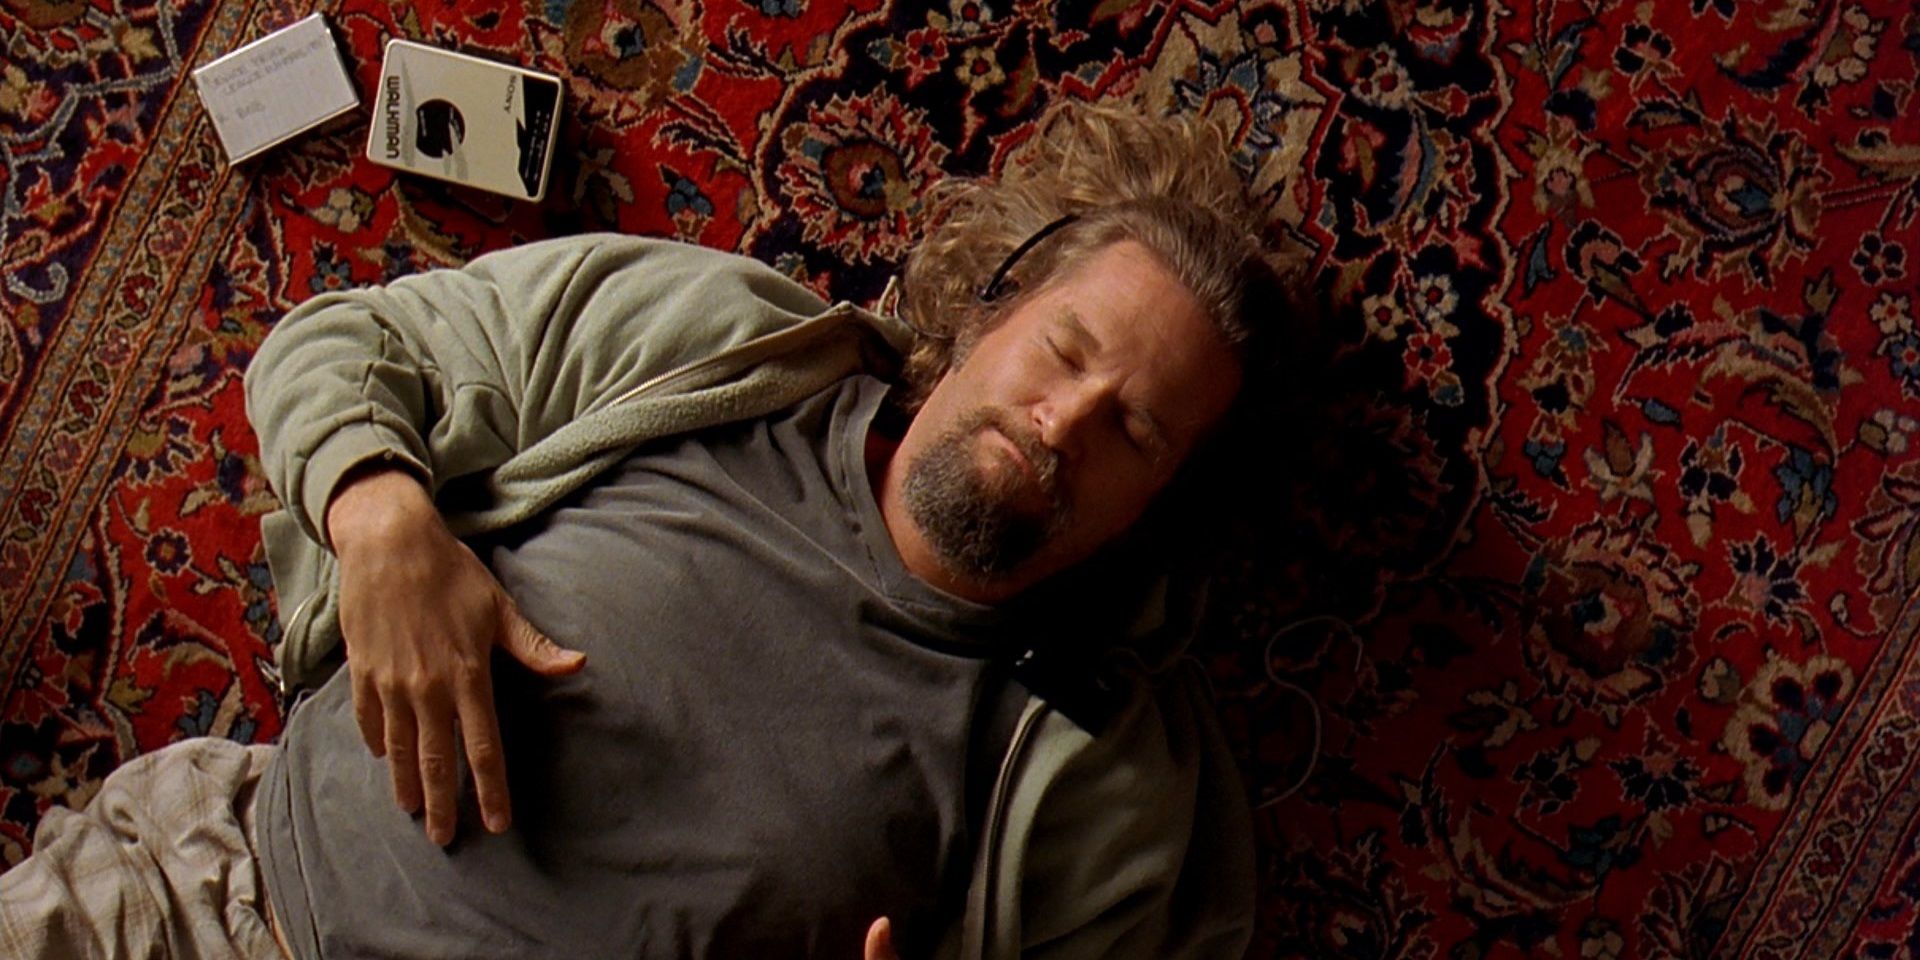 The Dude listening to music on his new rug in The Big Lebowski